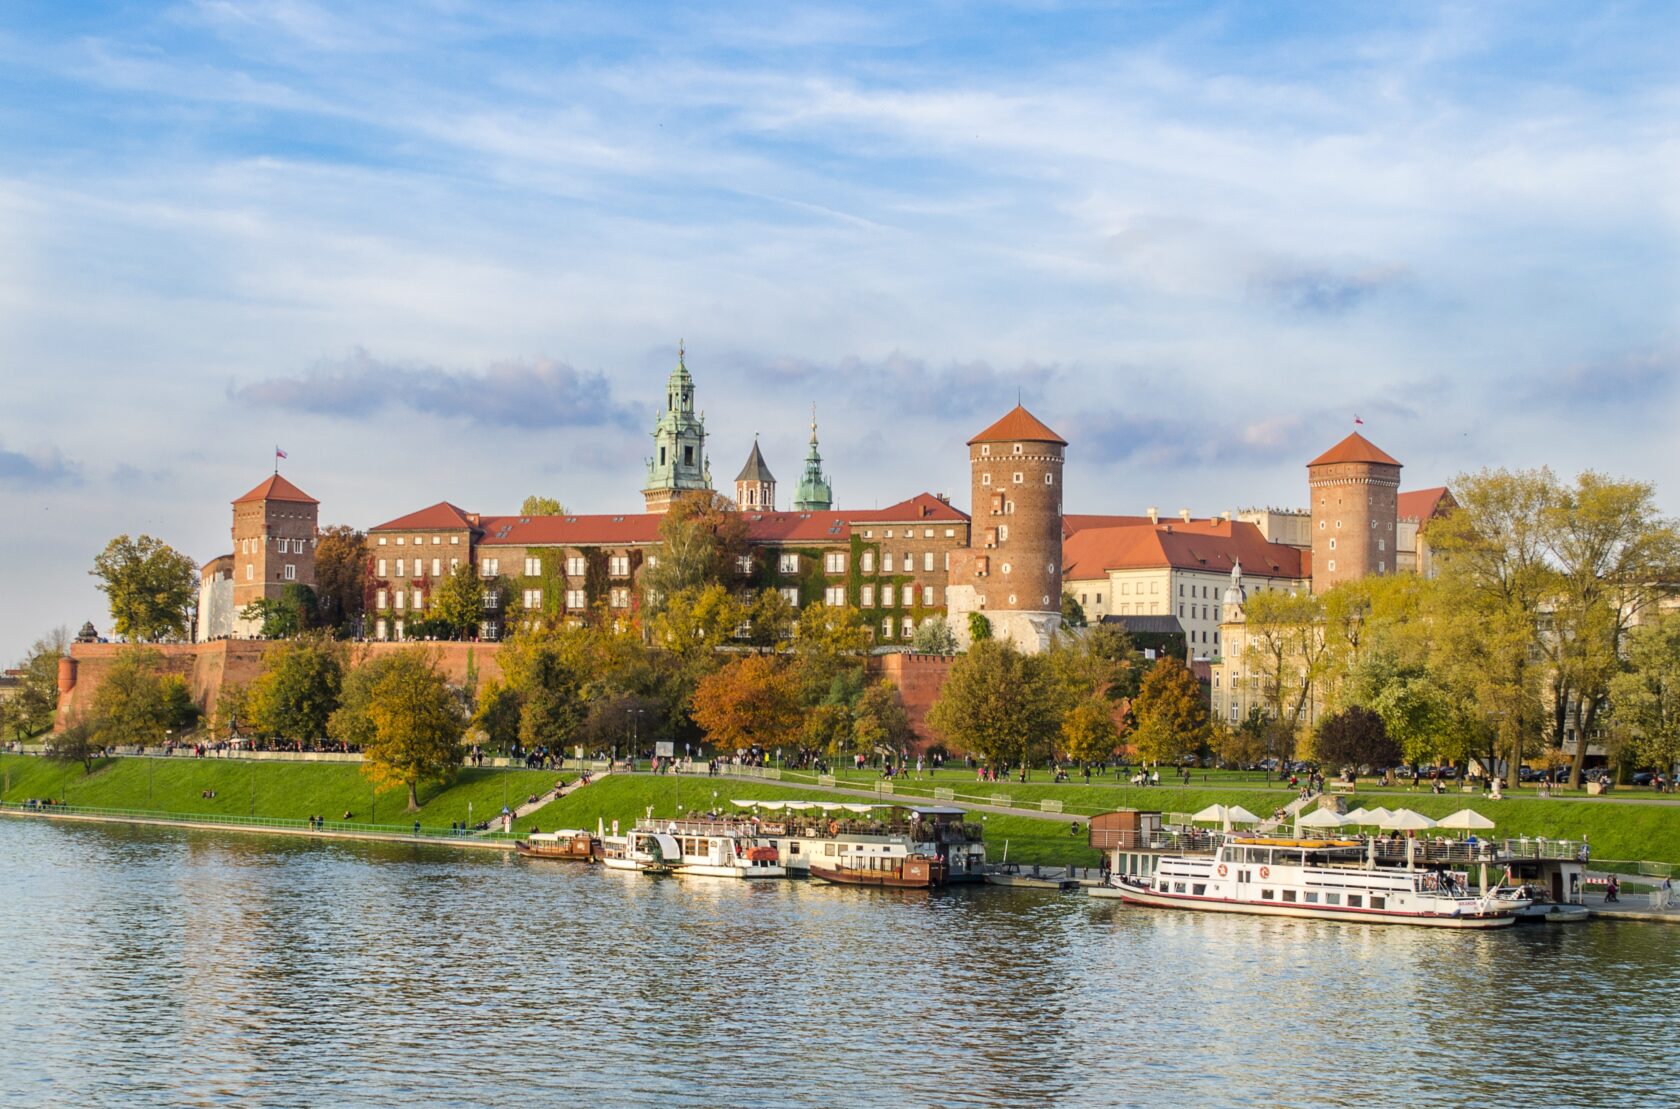 A view from the water of Wawel Castle in Krakow, Poland (an Atlantis site).